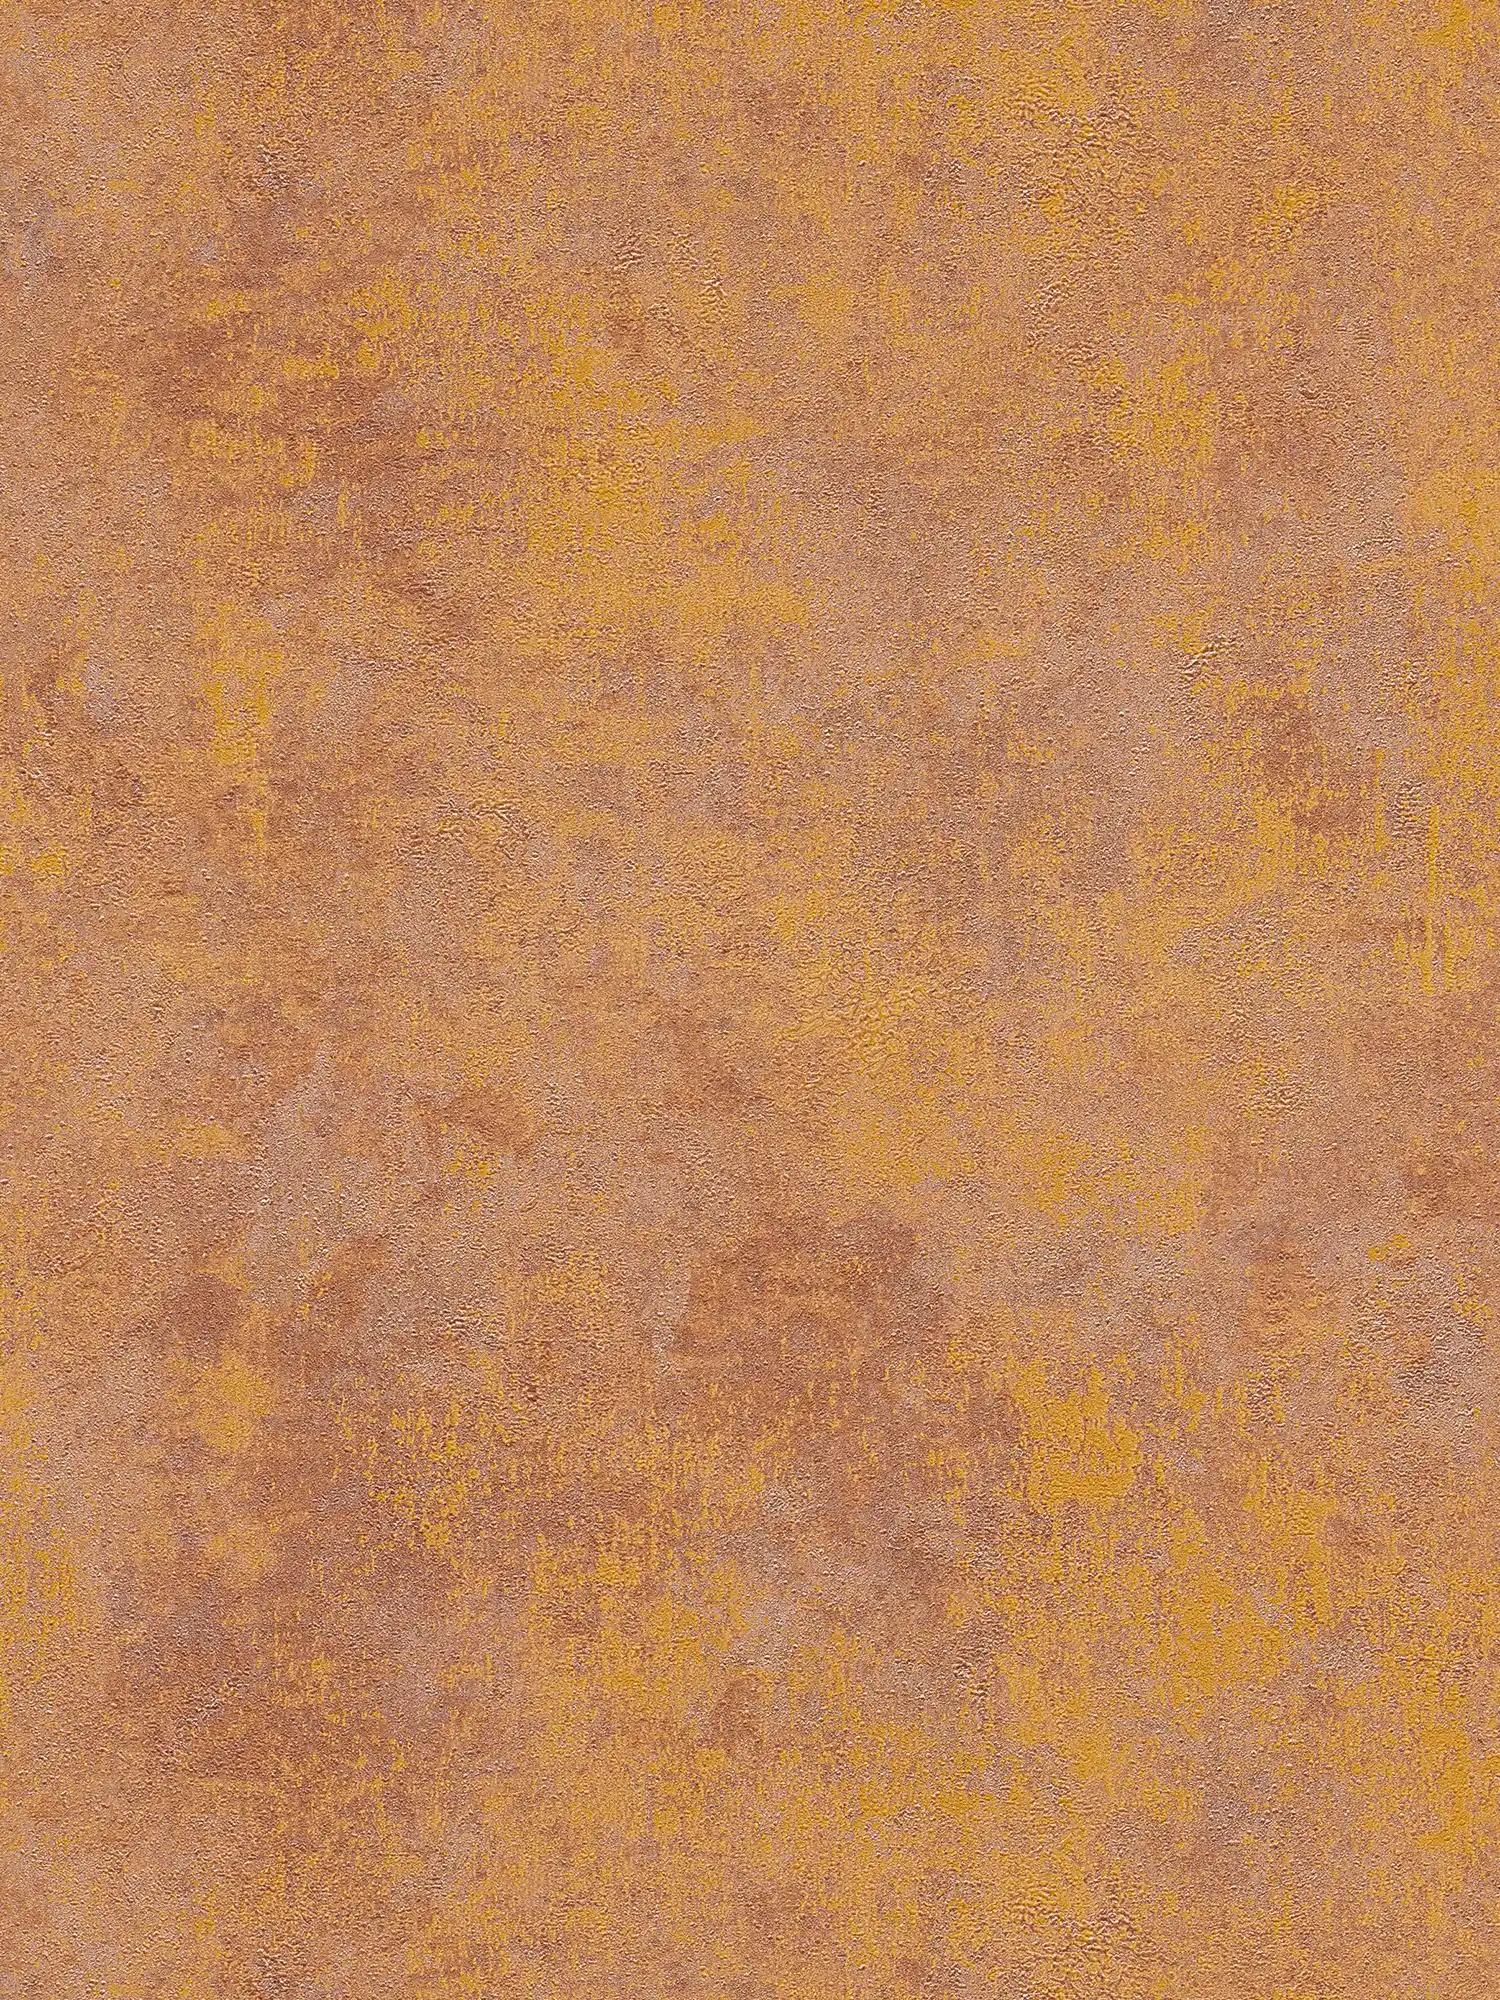 Non-woven wallpaper rust look with gloss effect - orange, copper, brown
